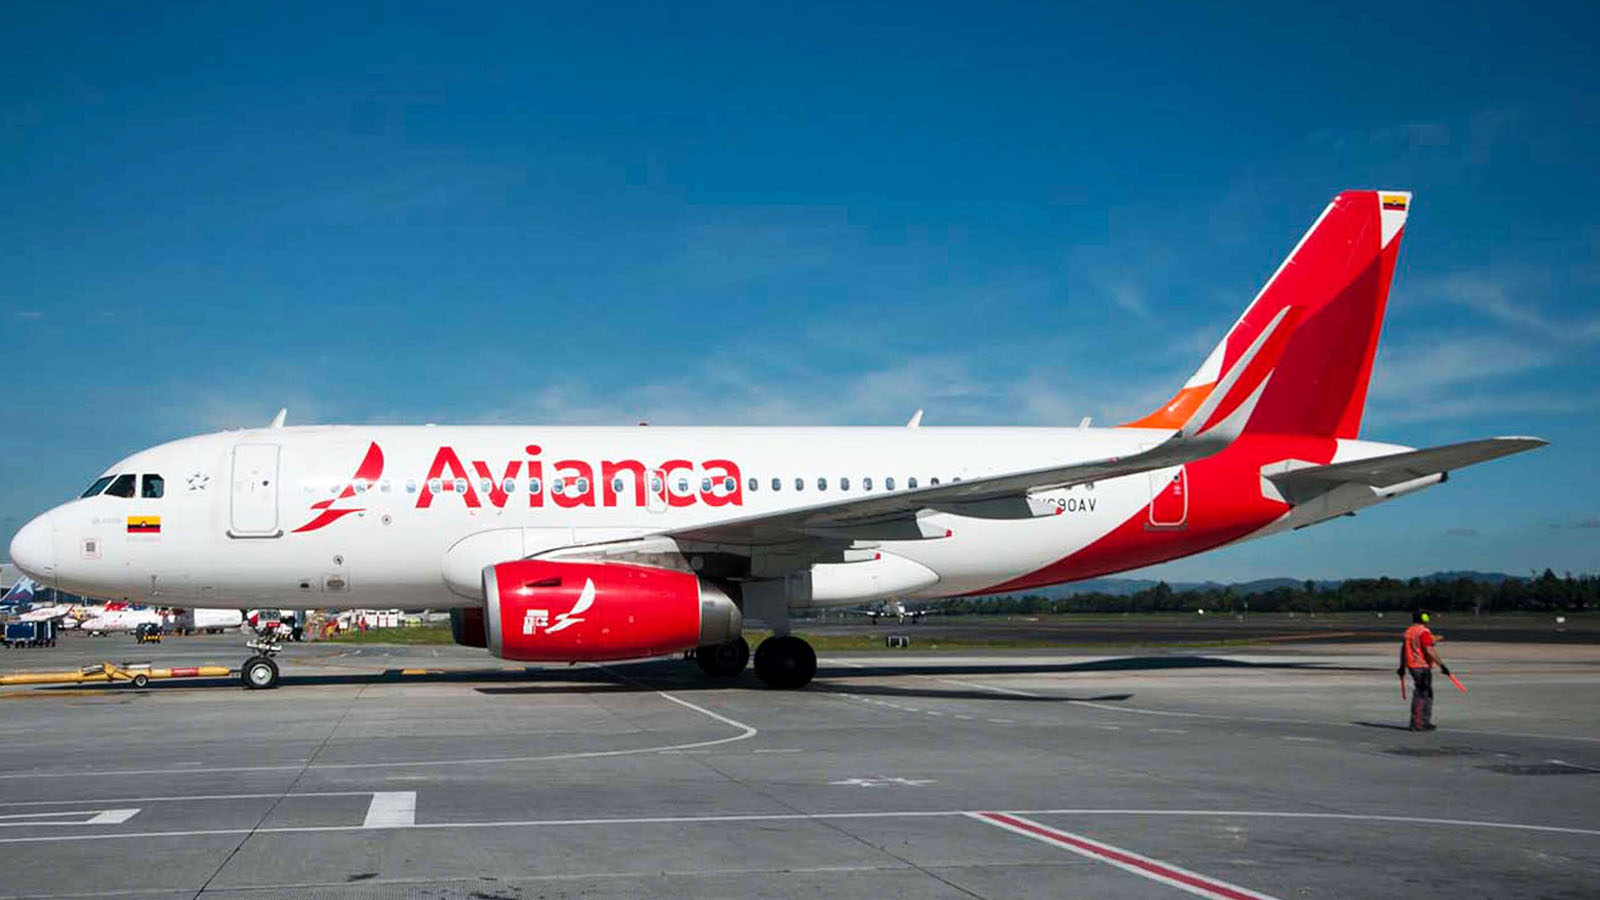 Avianca miles are certainly not flexible in the event of death